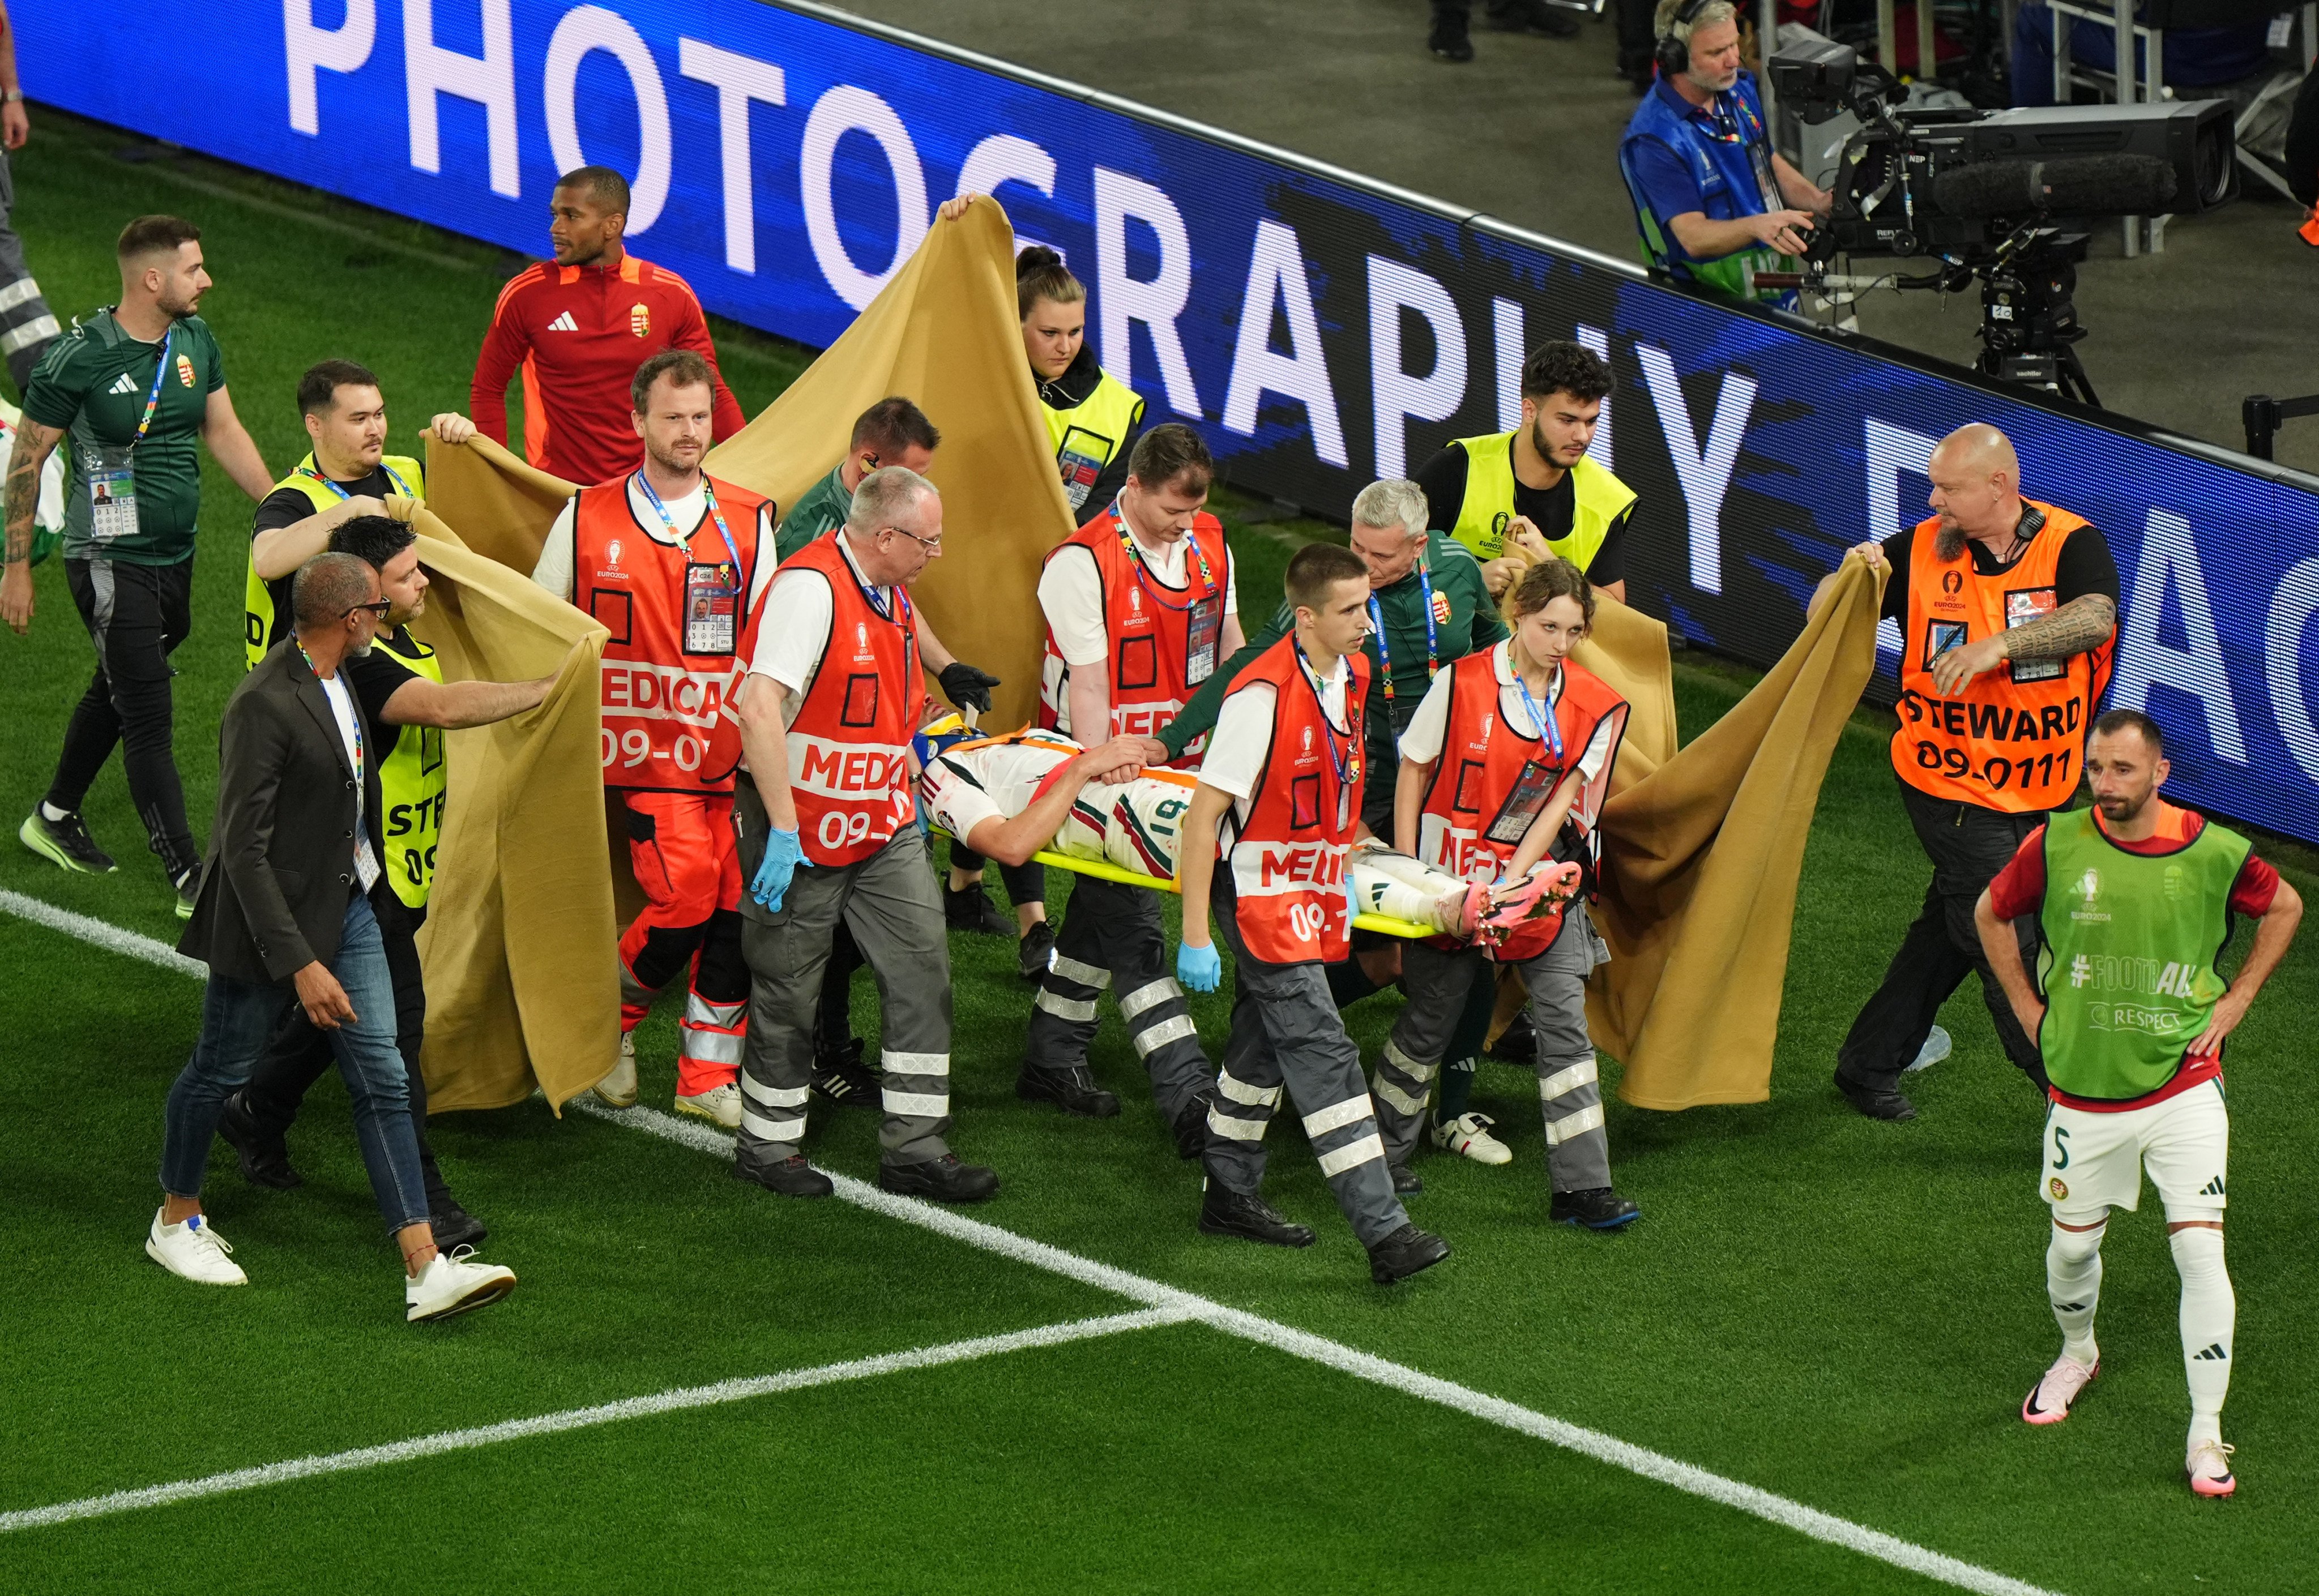 Hungary’s Barnabas Varga is stretchered off after suffering a sickening injury during the win over Scotland. Photo: DPA